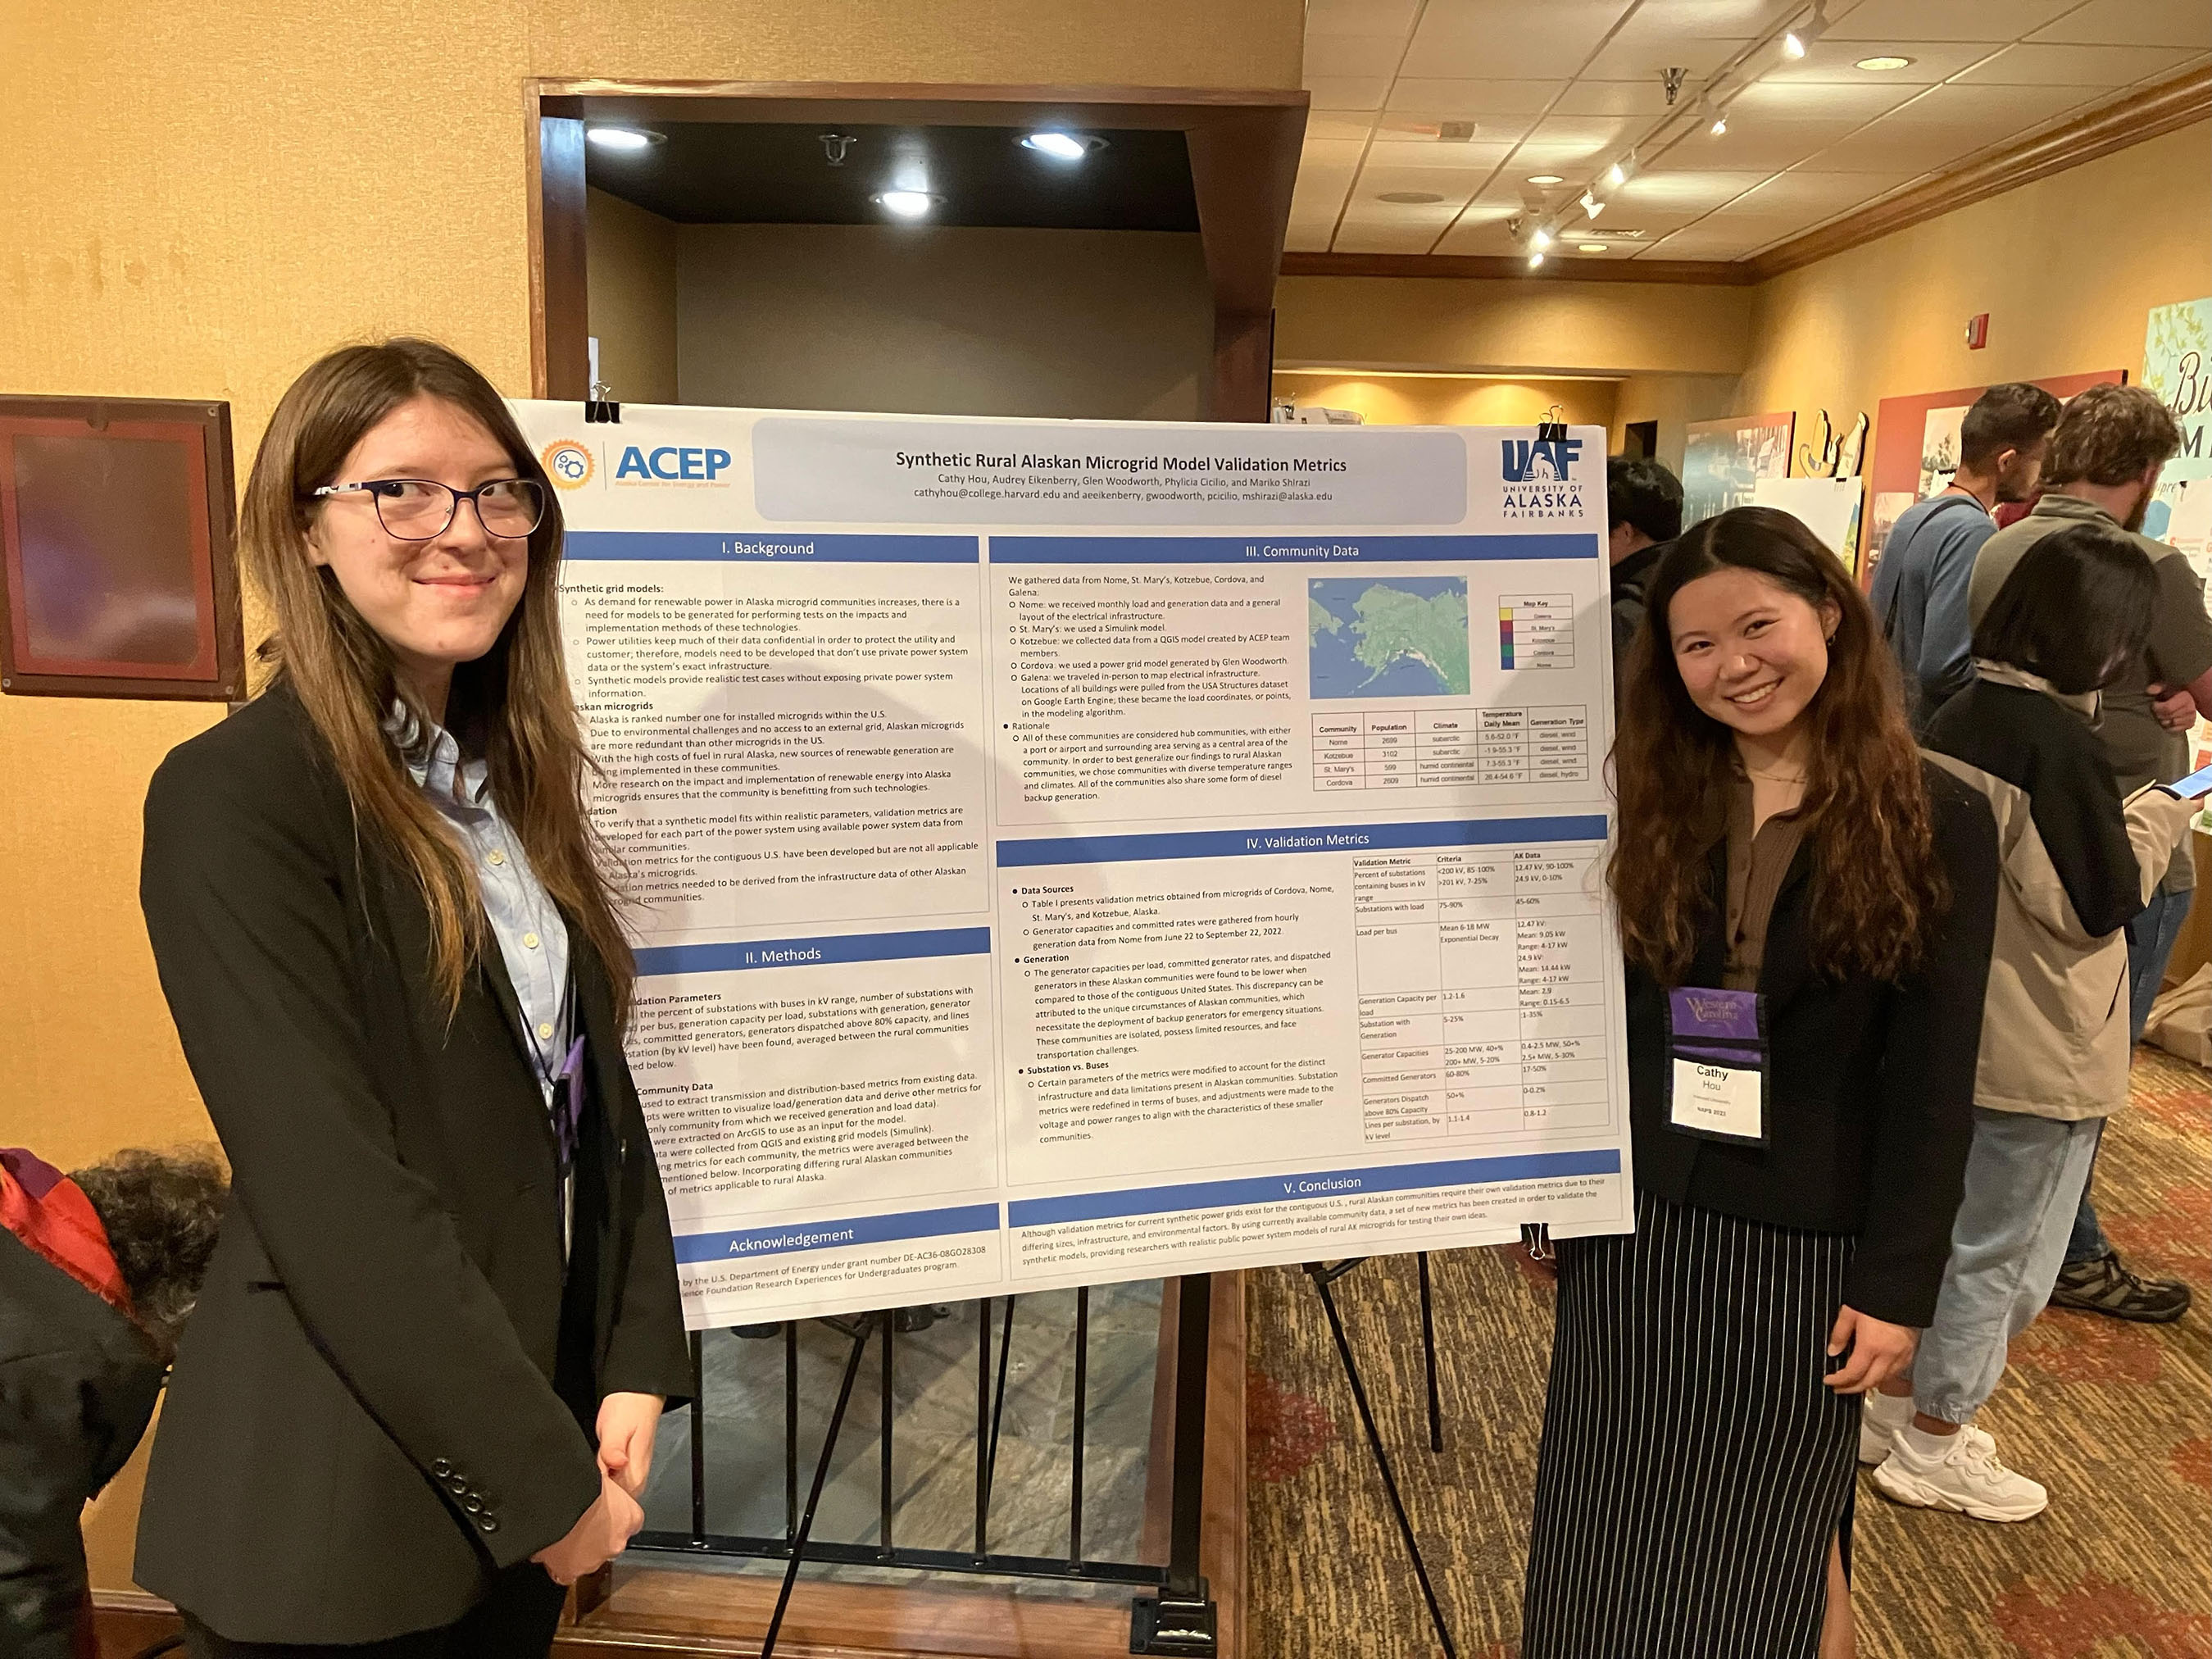 Audrey Eikenberry and Cathy Hou present their poster at the North American Power Symposium.